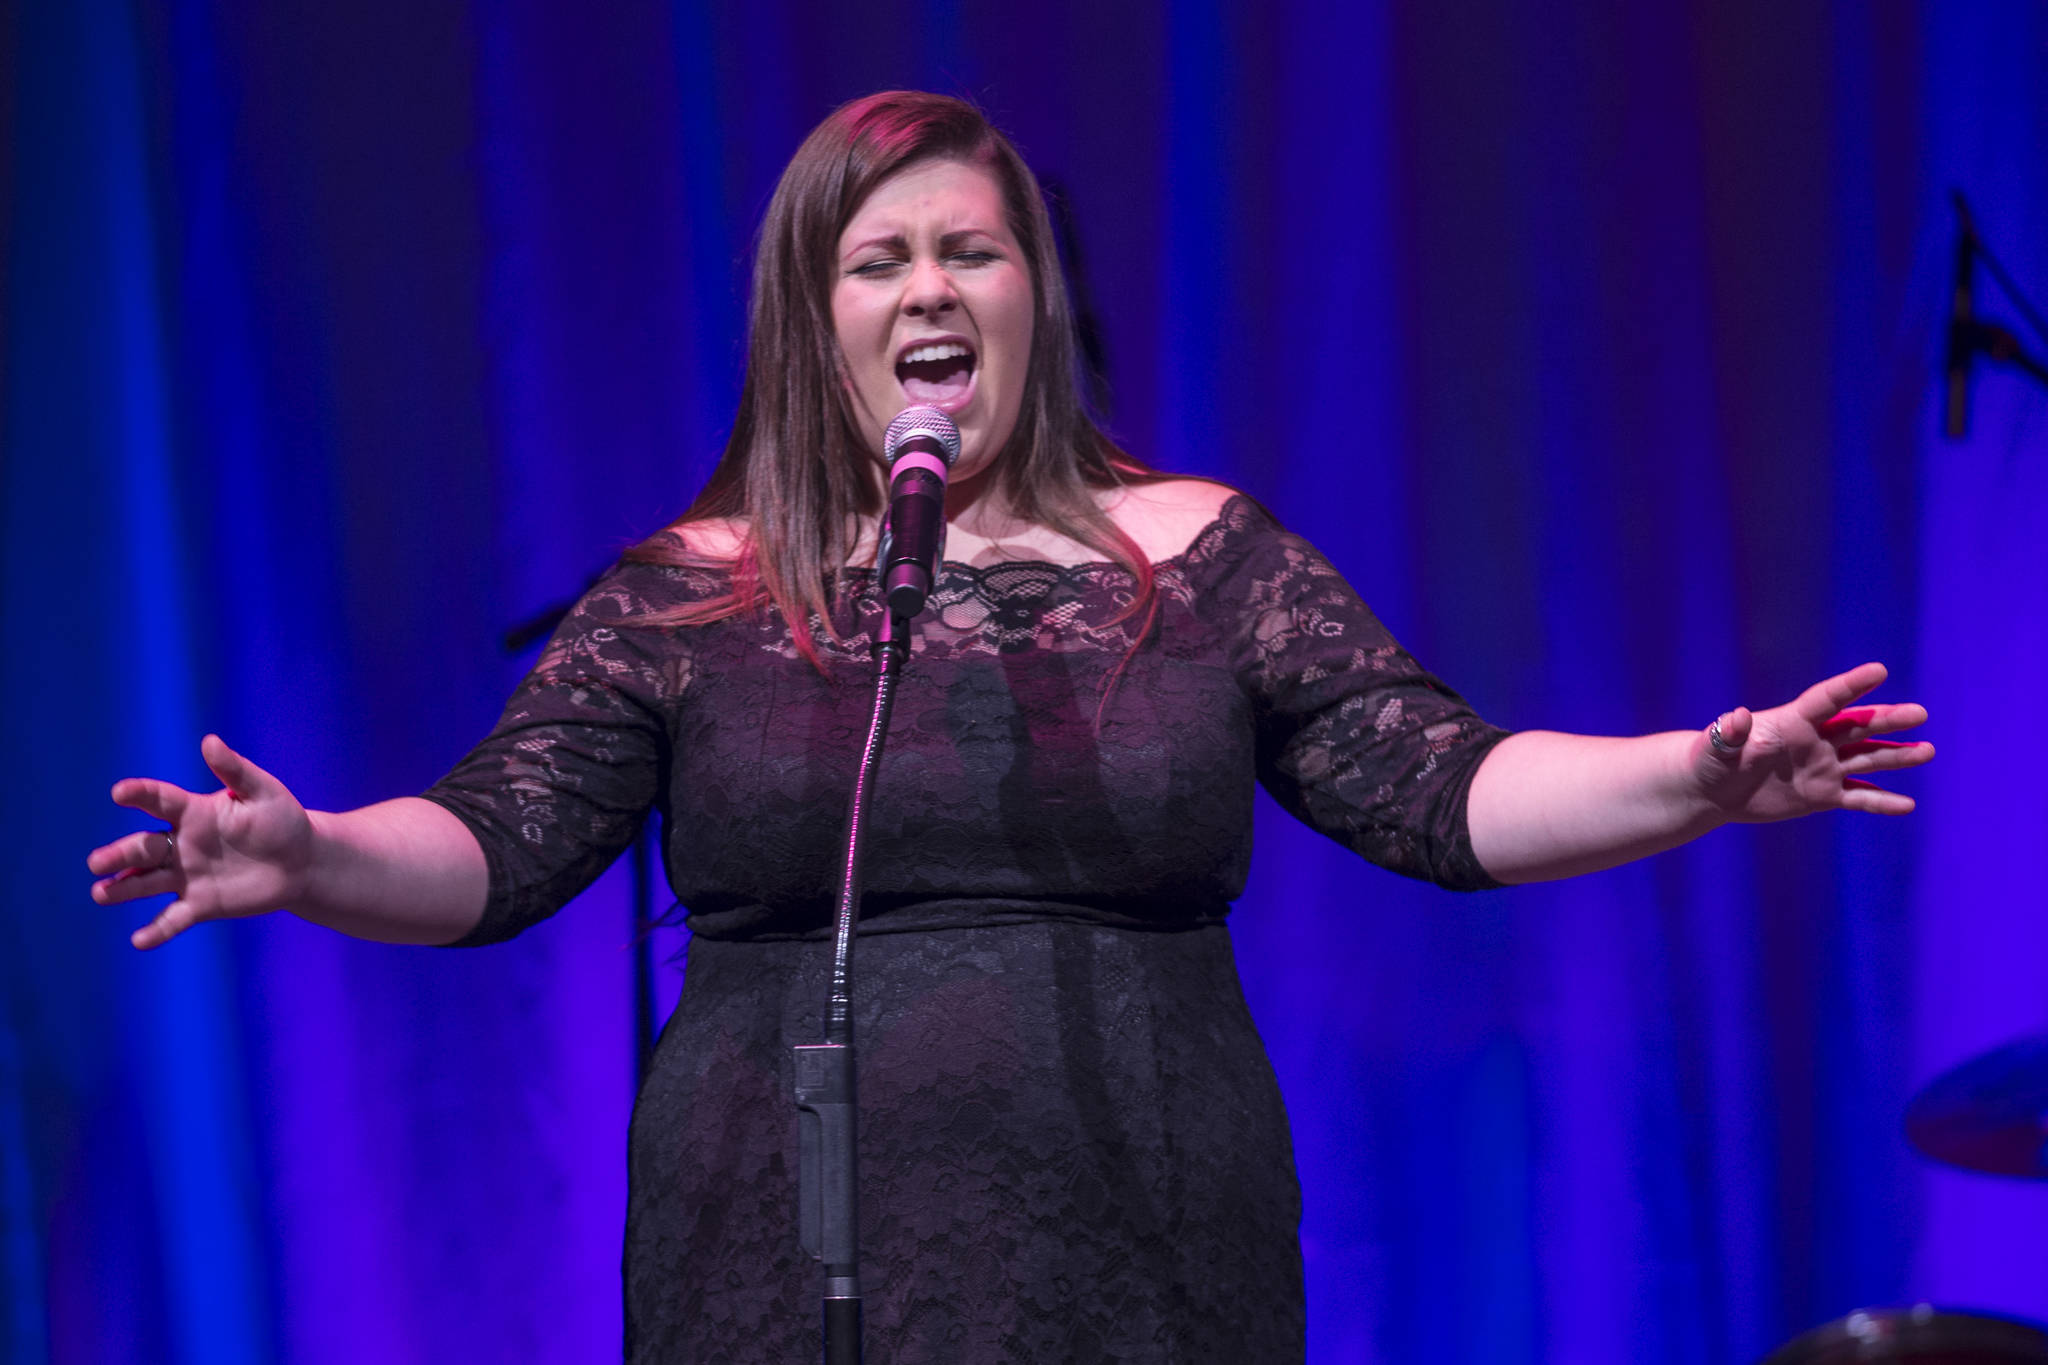 Alyssa Fischer performs at Juneau Lyric Opera’s production of “Who’s Your Diva?” at Centennial Hall on Saturday, Sept. 29, 2018. (Michael Penn | Juneau Empire)